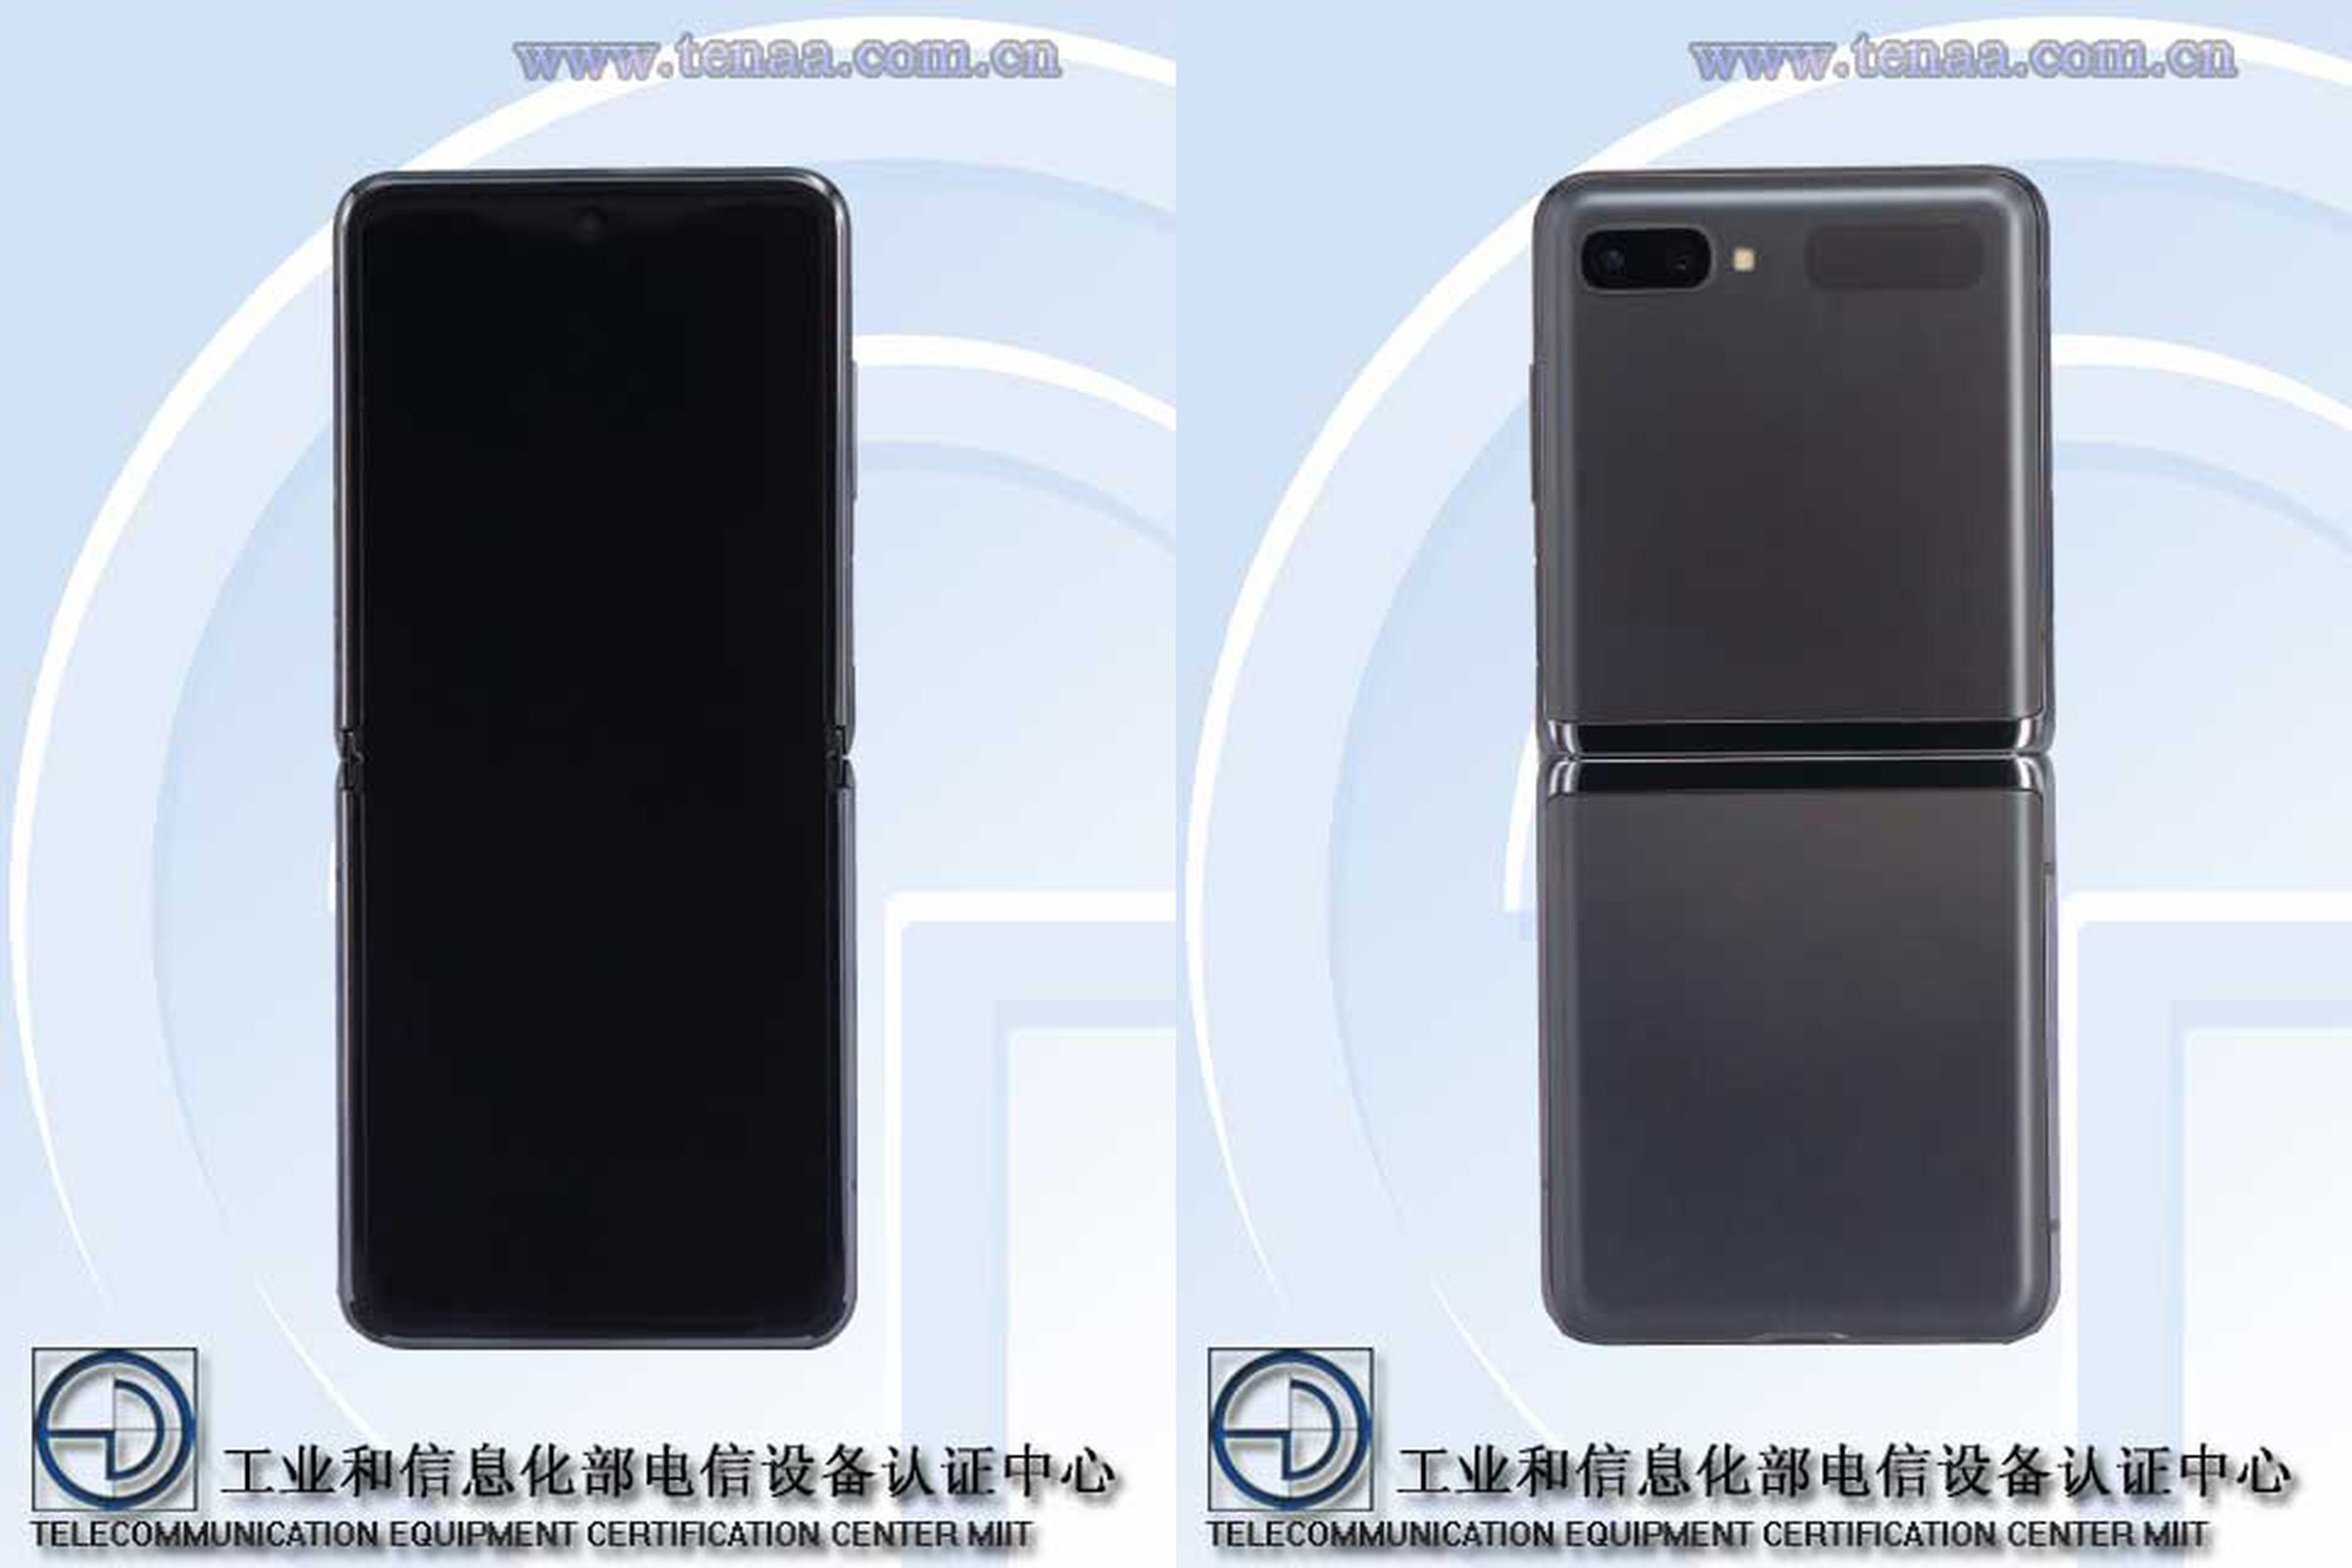 The images show a very similar-looking device to the LTE Galaxy Z Flip.